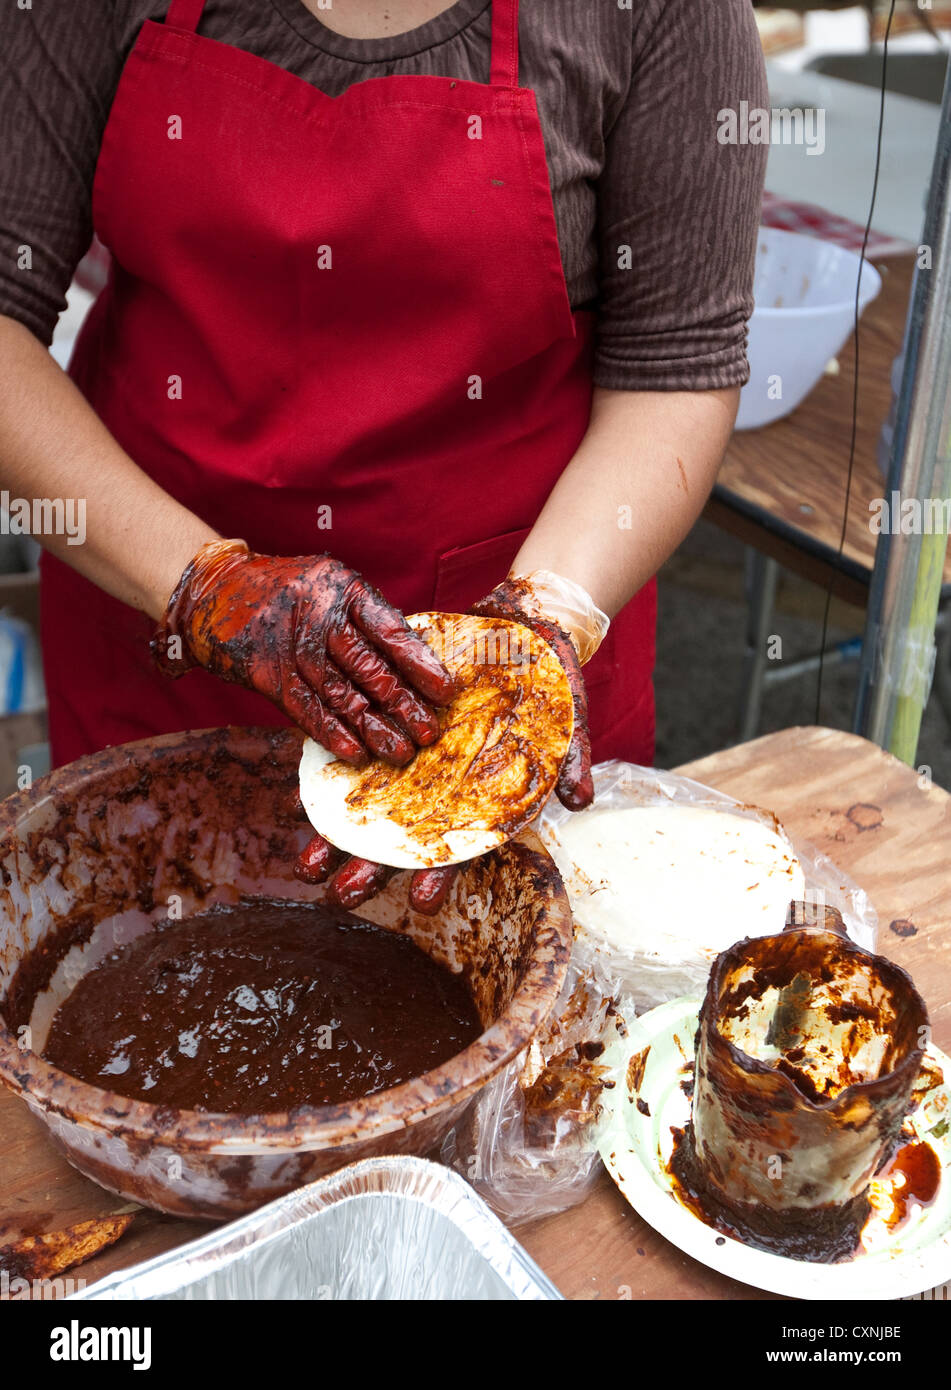 Hispanic woman prepares traditional Mexican enchiladas by covering corn tortilla with red chile sauce at outdoor church festival Stock Photo